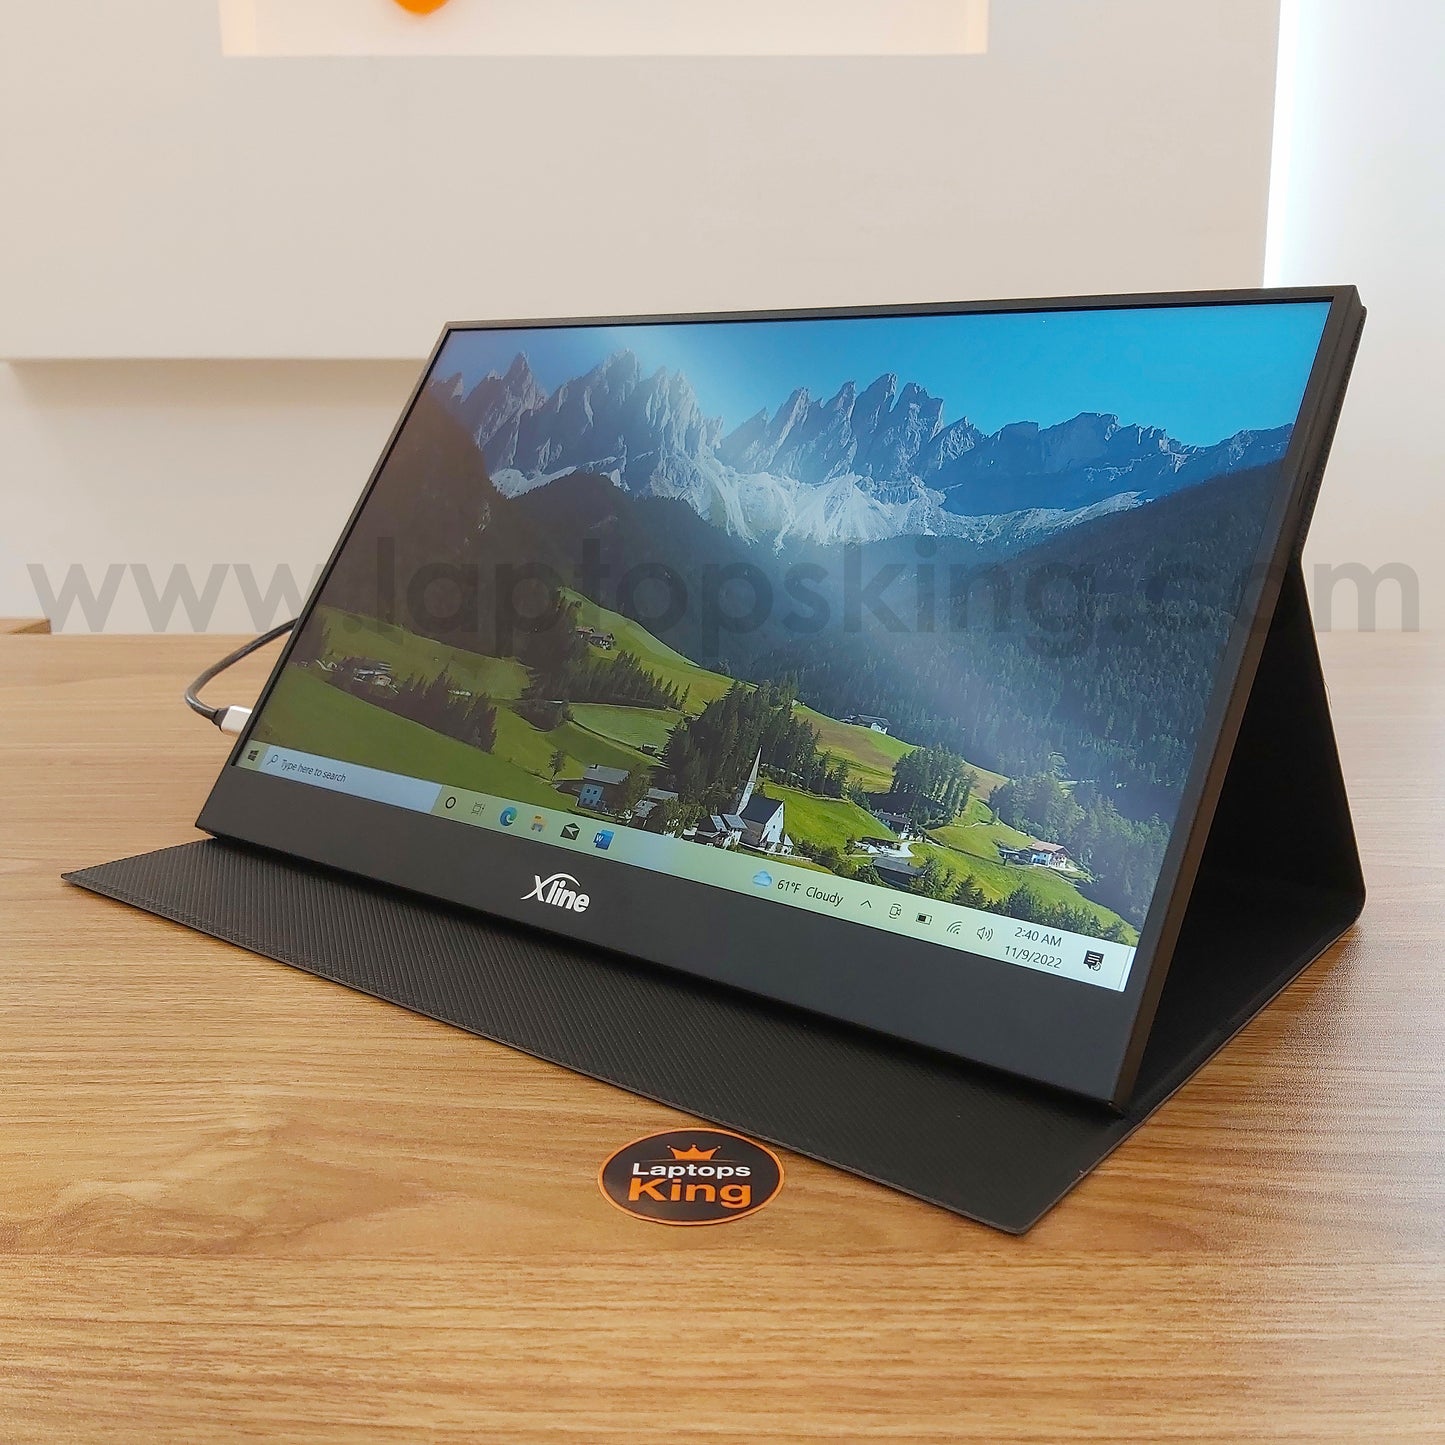 Xline Portable 15" Monitor Offers (New)